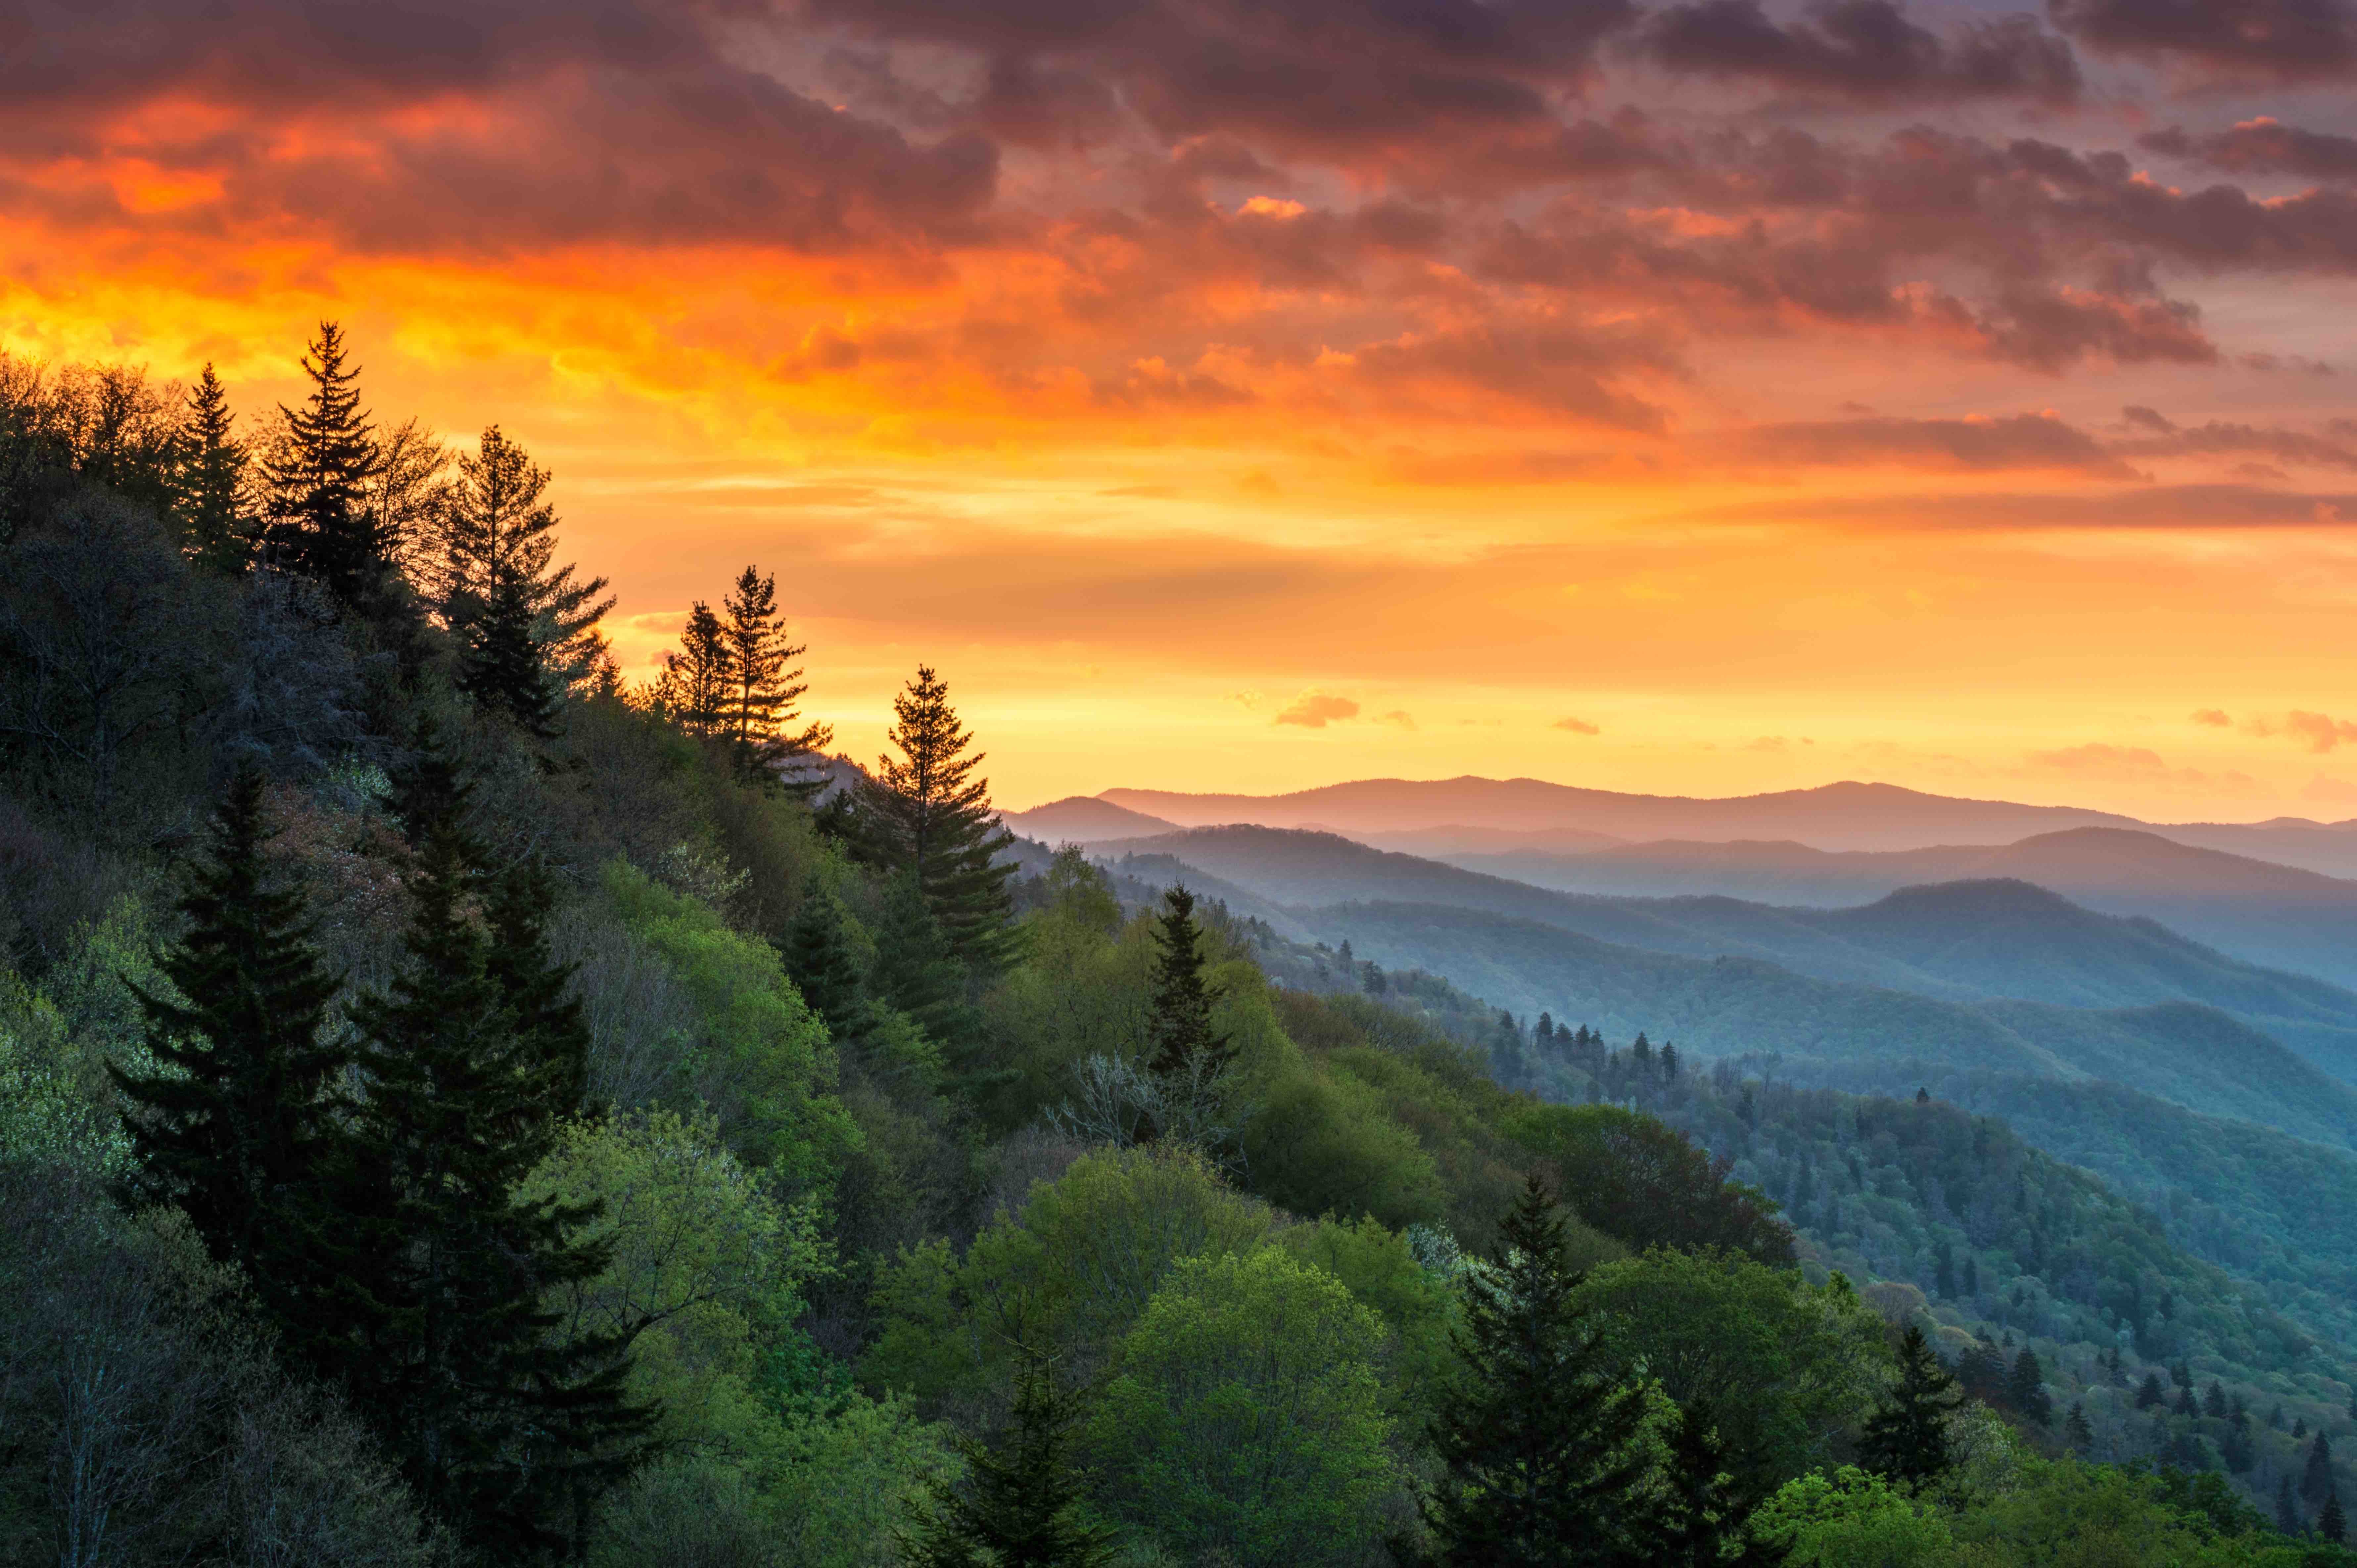 The Great Smoky Mountains of Tennessee